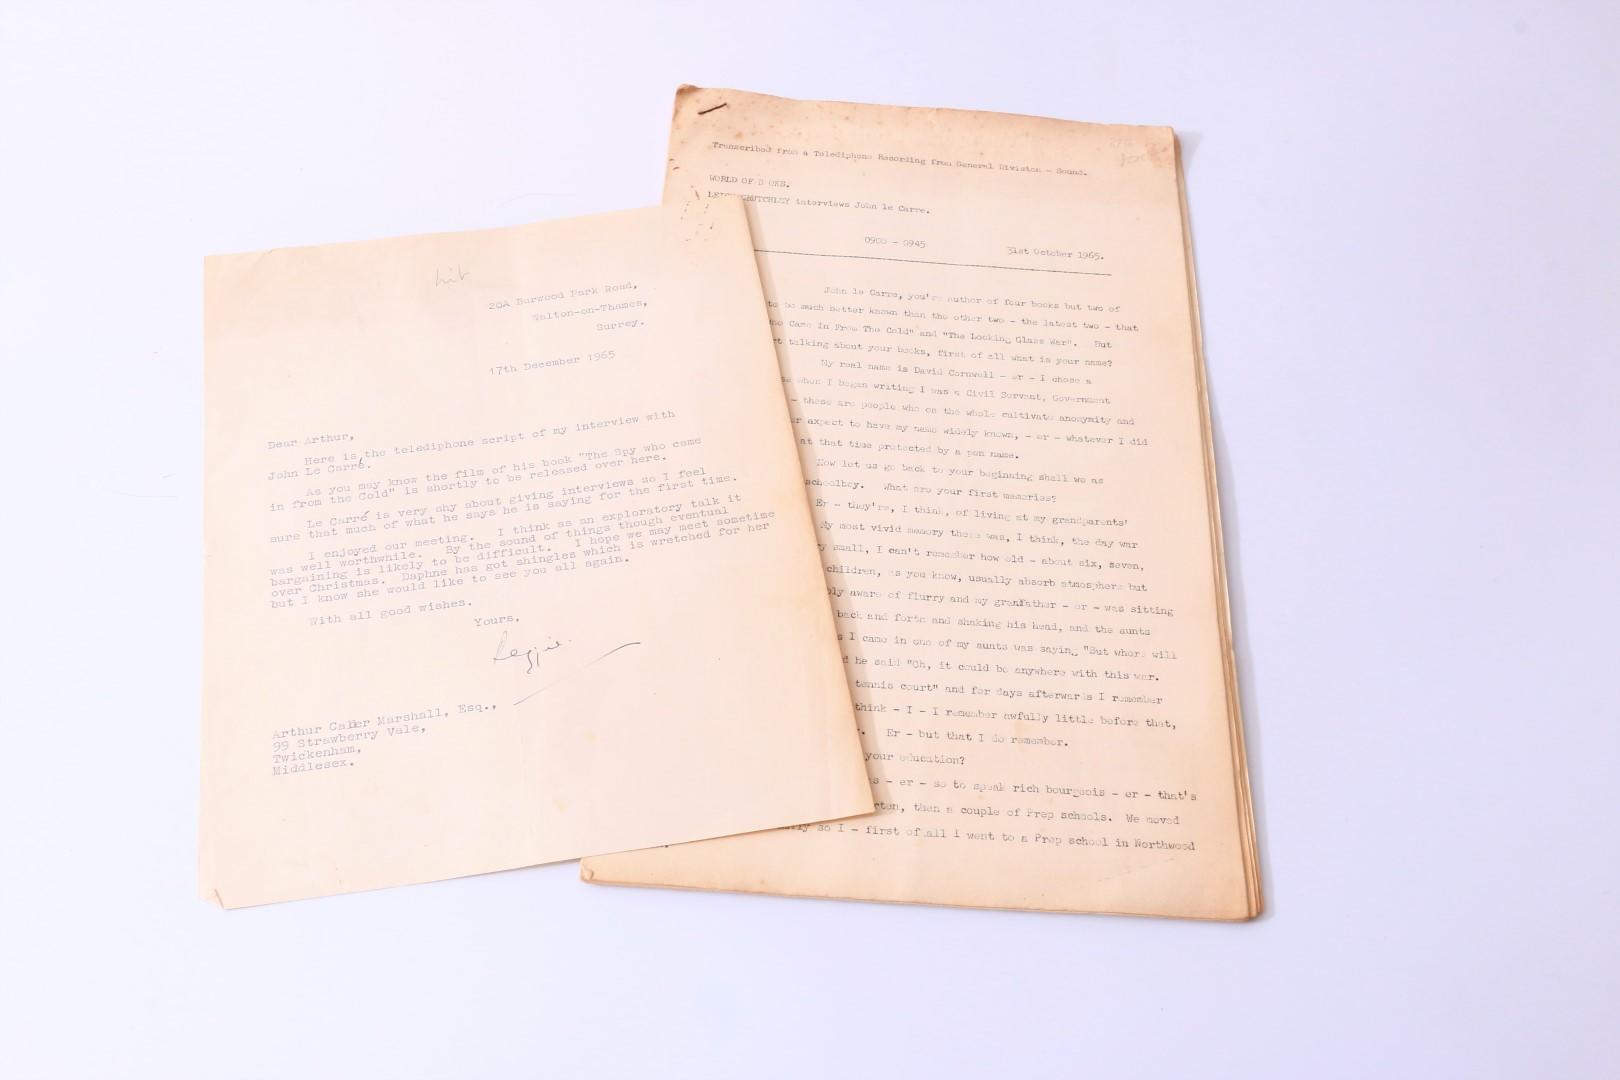 John le Carre - Typescript of an Interview with Le Carre by Leigh Crutchley - , 1965, Manuscript.